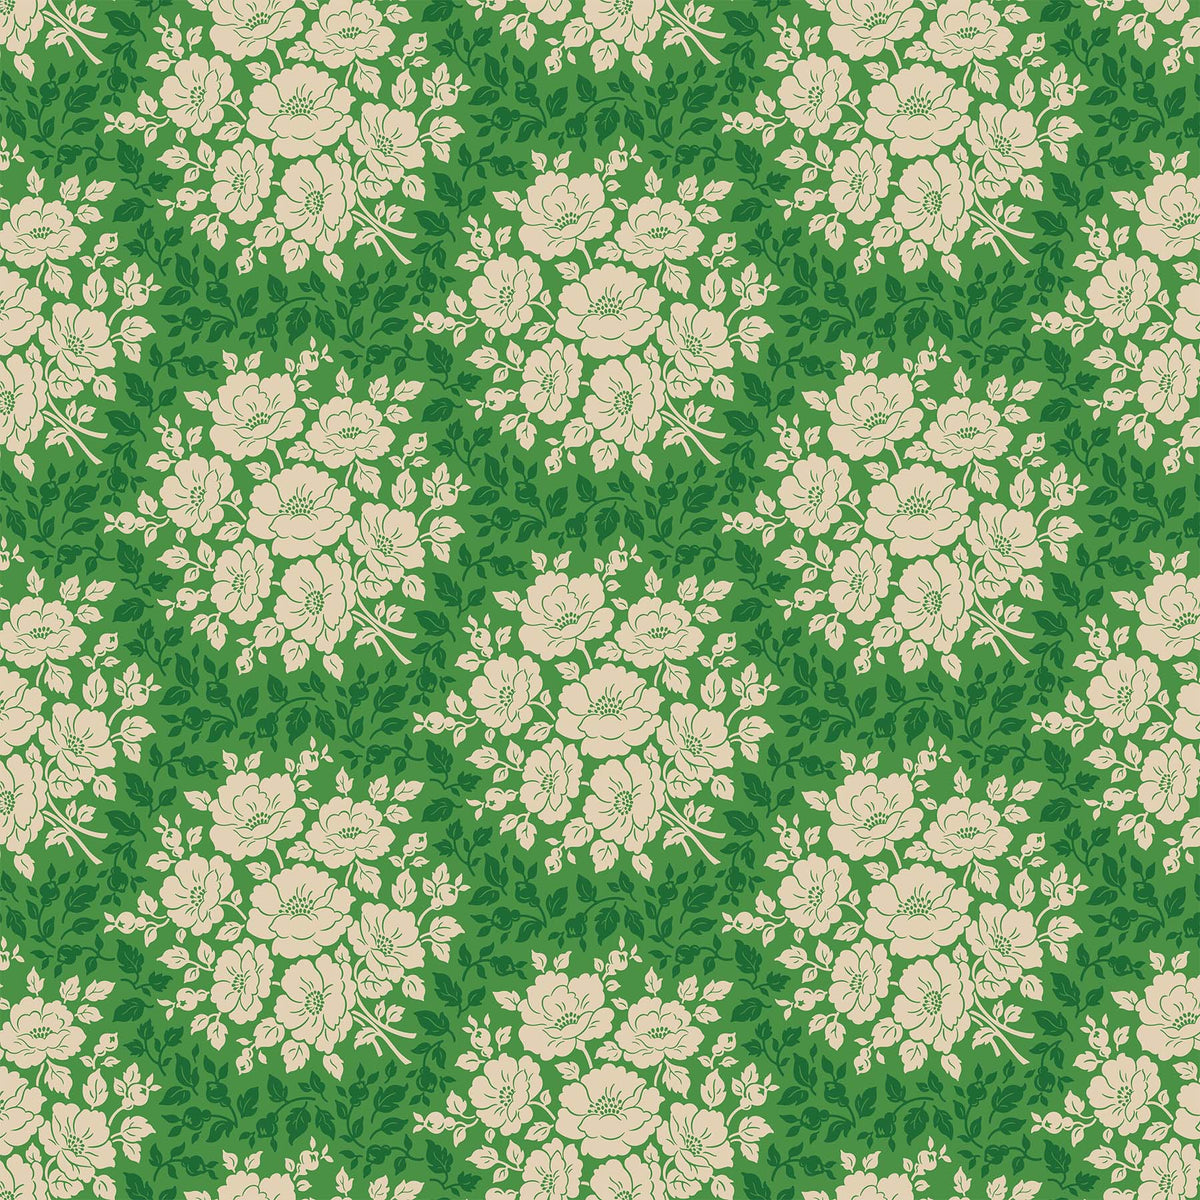 Local Honey Quilt Fabric - Morning Bloom on Clover Green - 90659-72